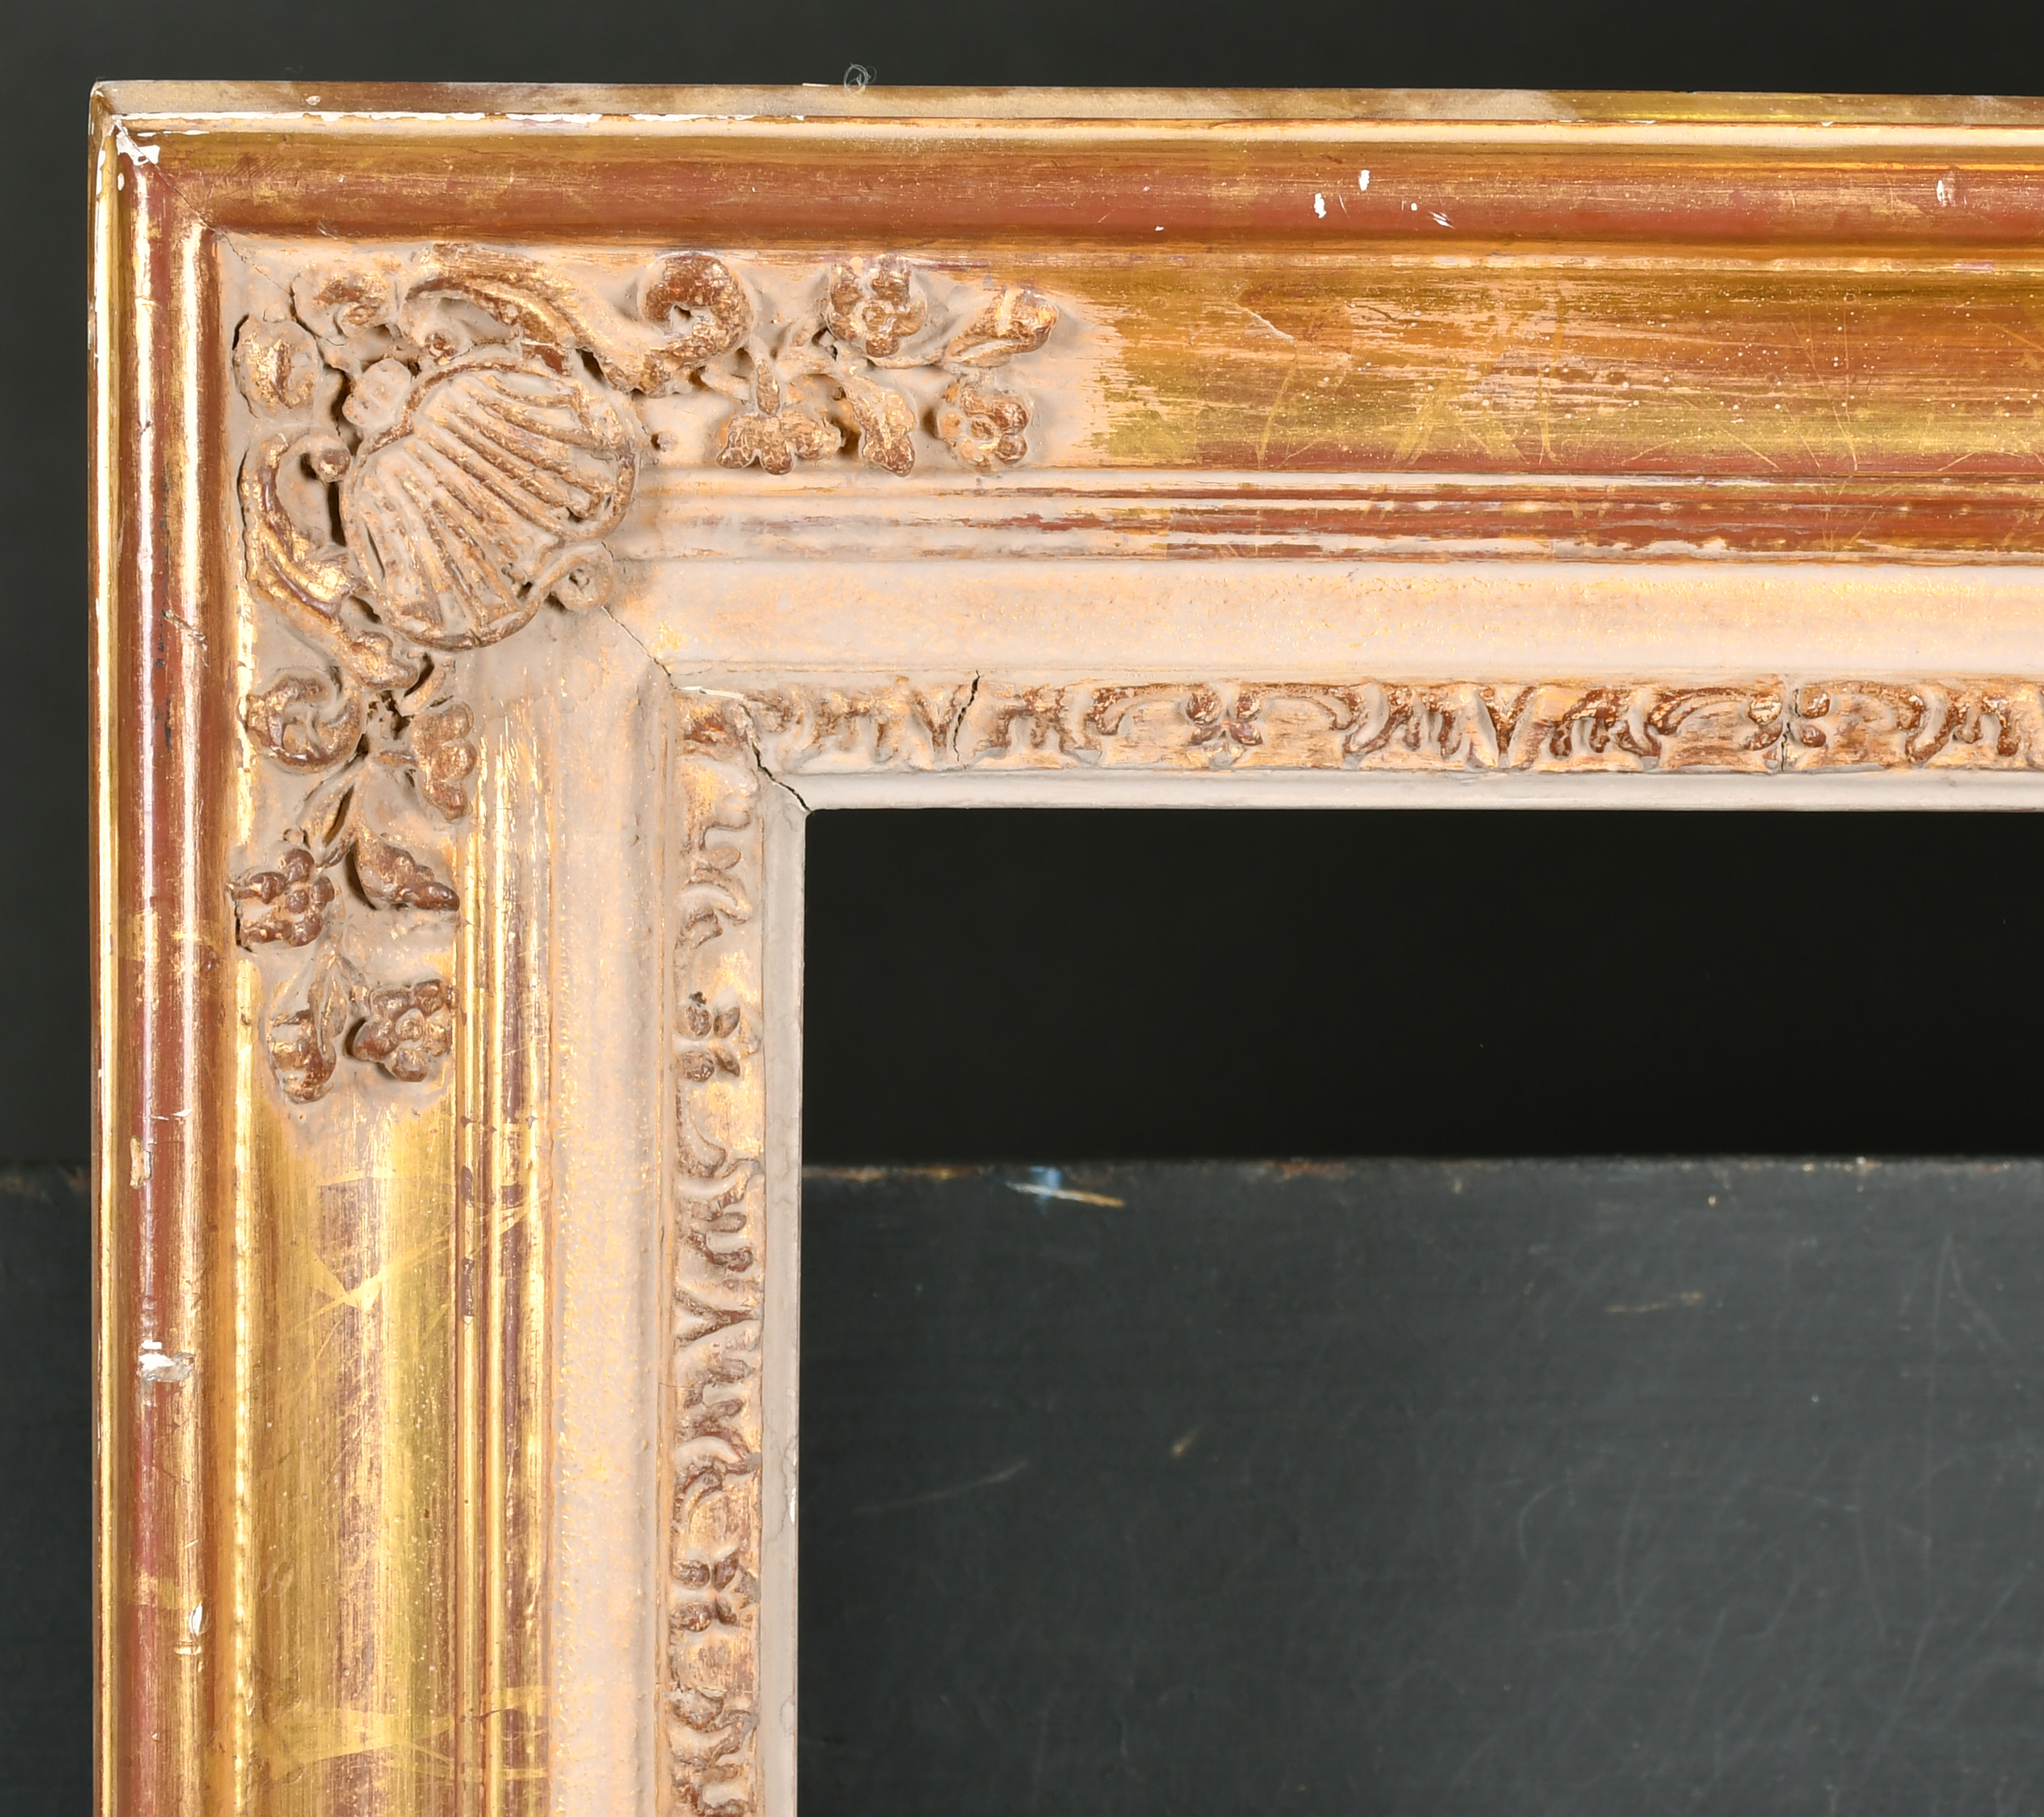 20th Century French School. A Gilt Composition Hollow Frame, rebate 18.25" x 14.25" (46.3 x 36.2cm)